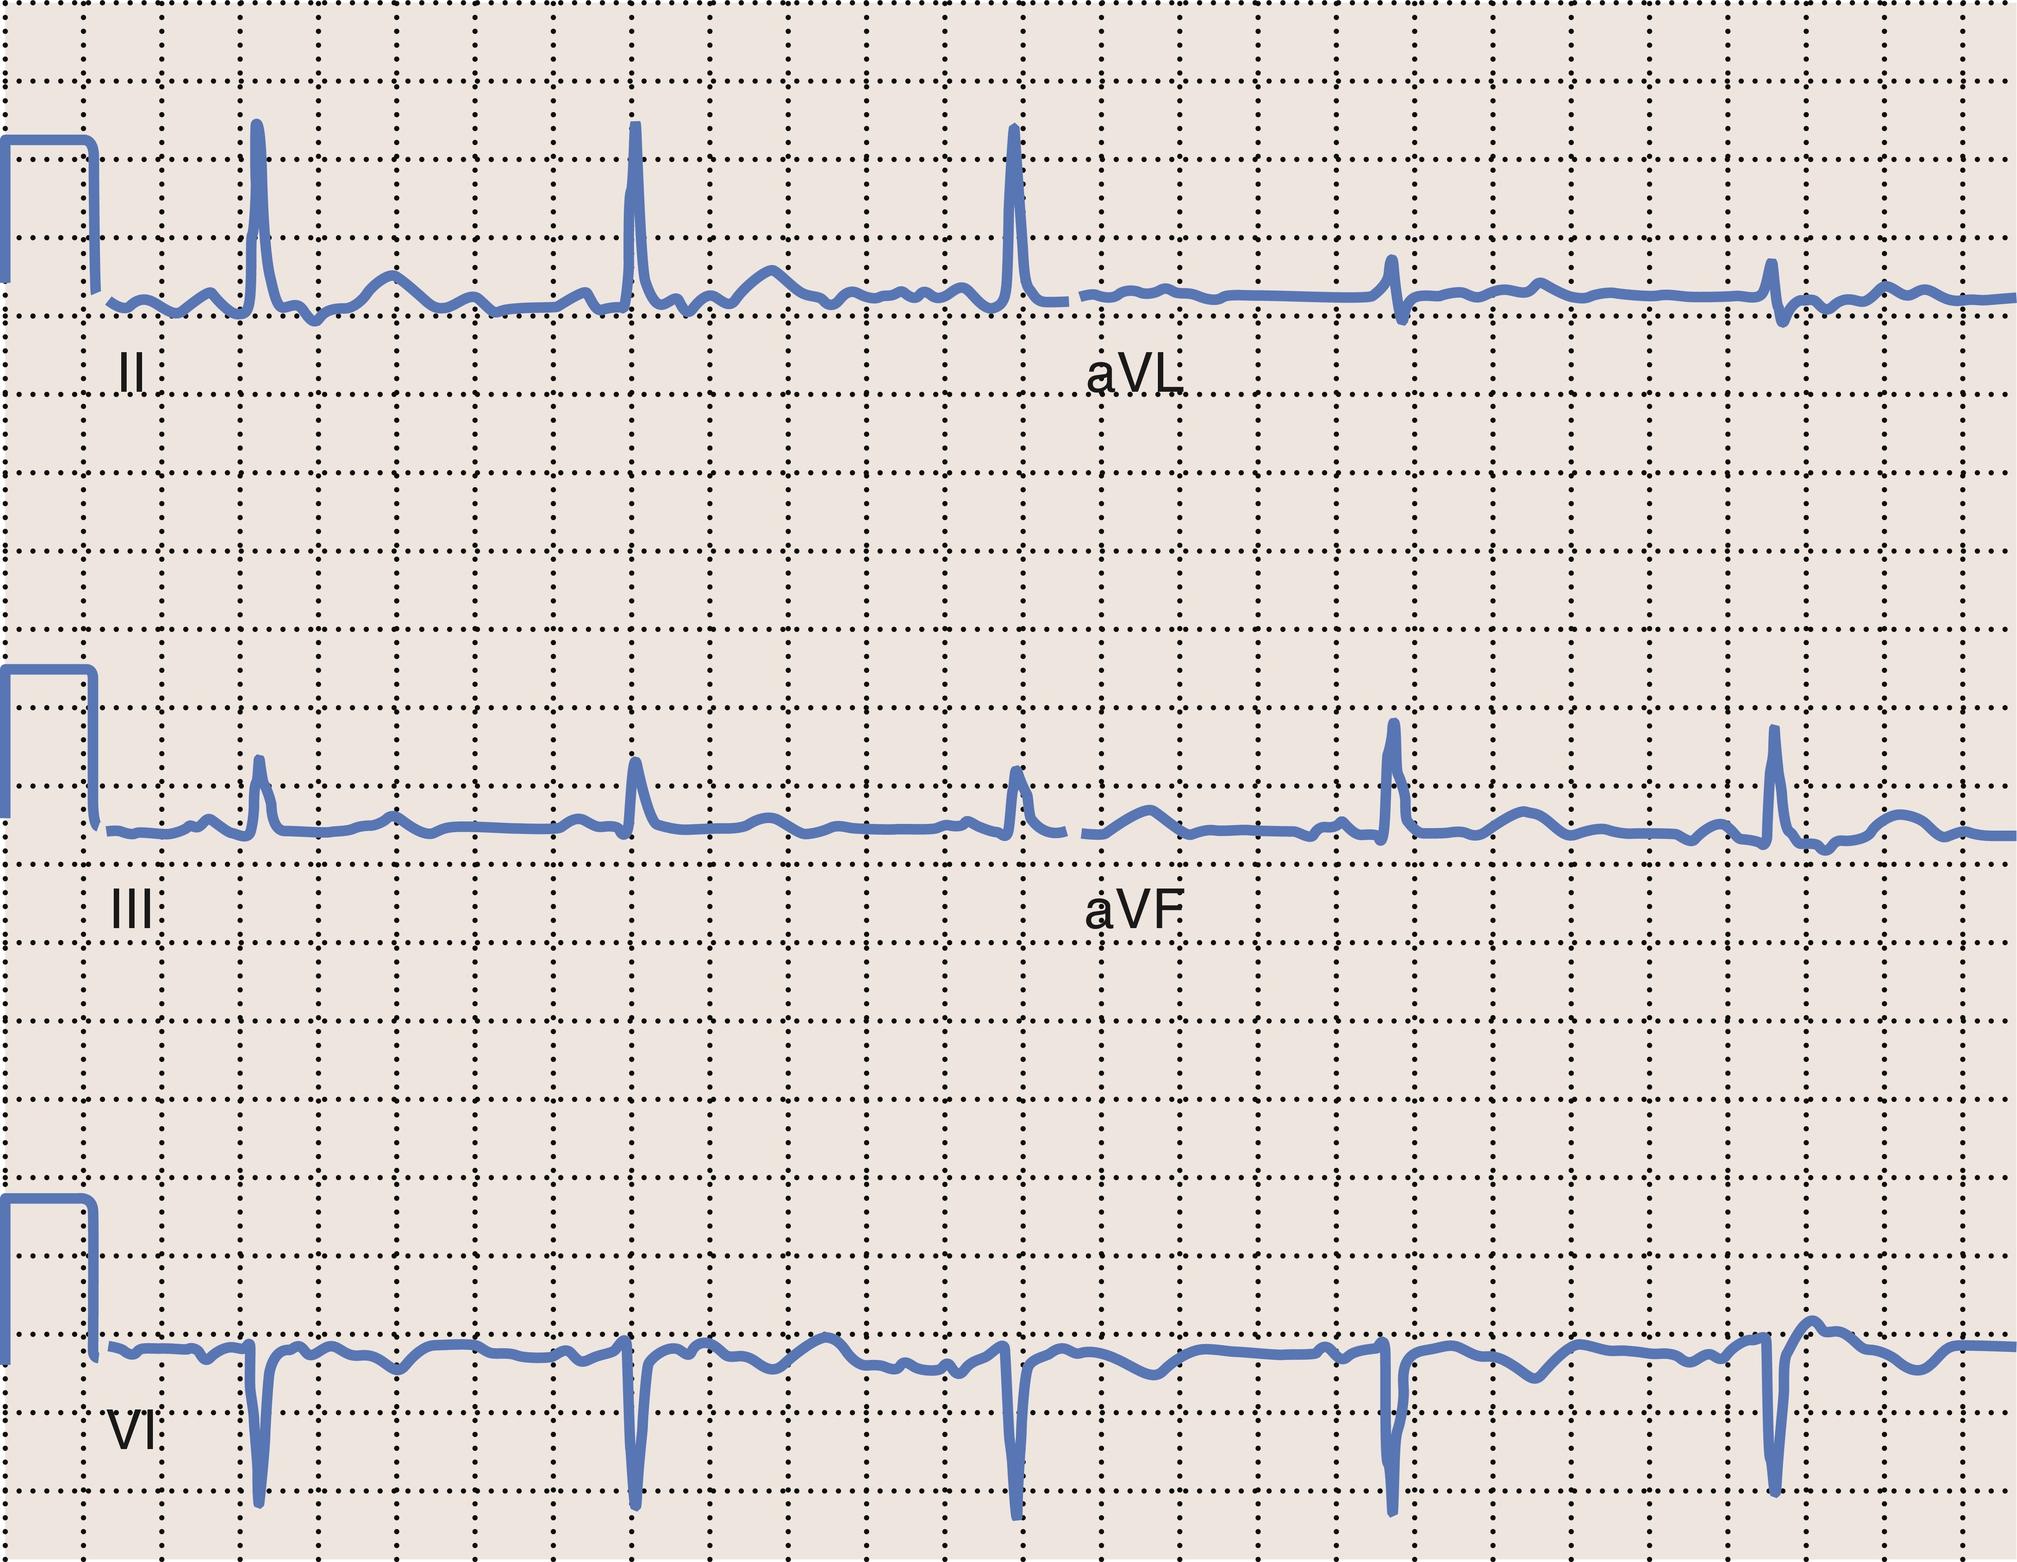 Fig. 15.4, Prolonged QT interval. The QT interval in this case is prolonged at a heart rate of 45 beats per minute. The rate-corrected QT (QTc) is equal to the QT interval/sqrt (RR interval).